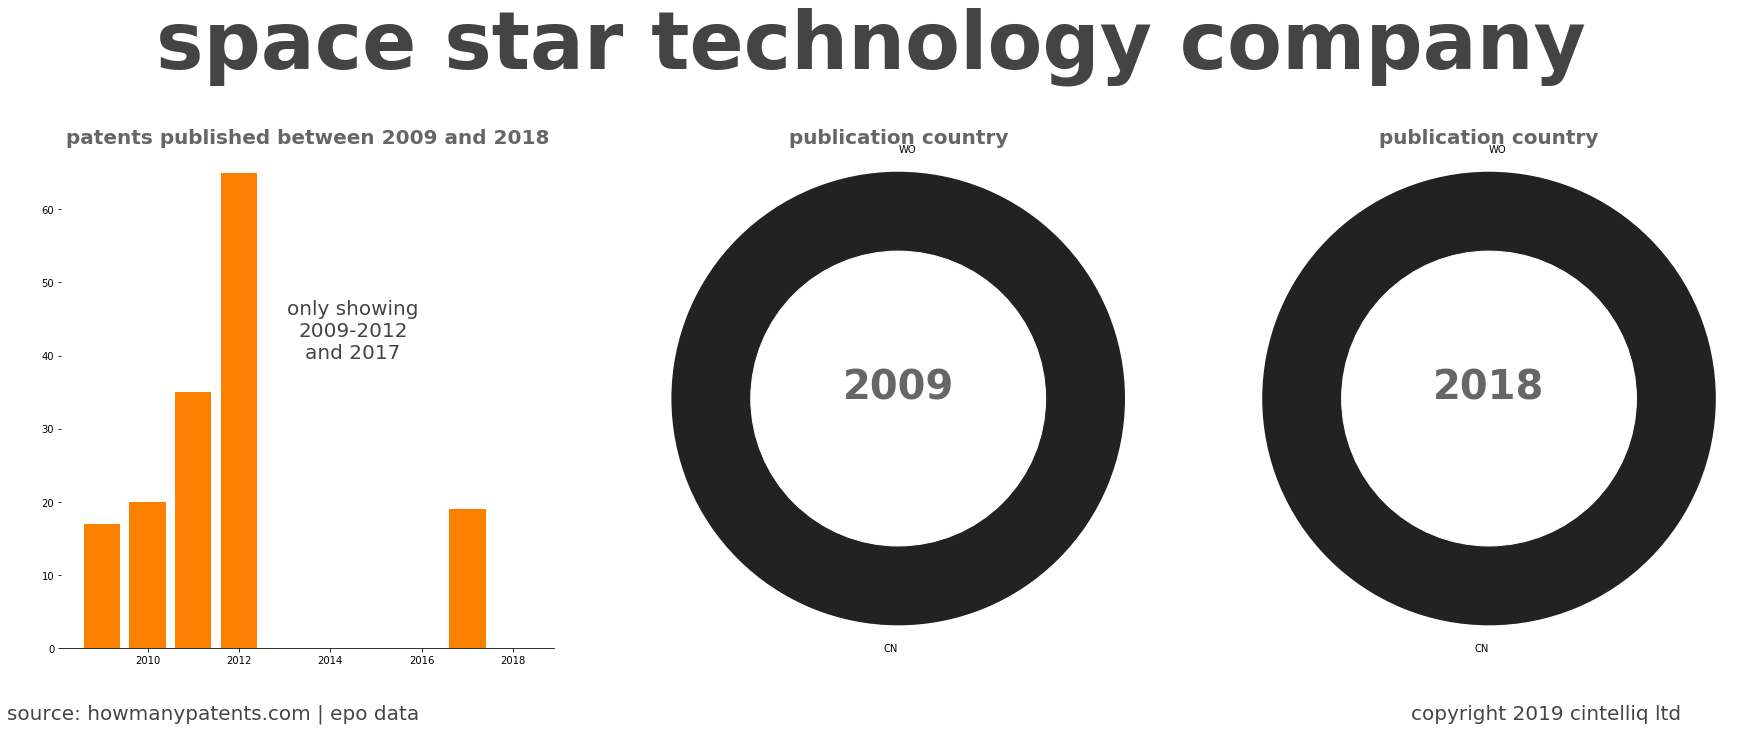 summary of patents for Space Star Technology Company